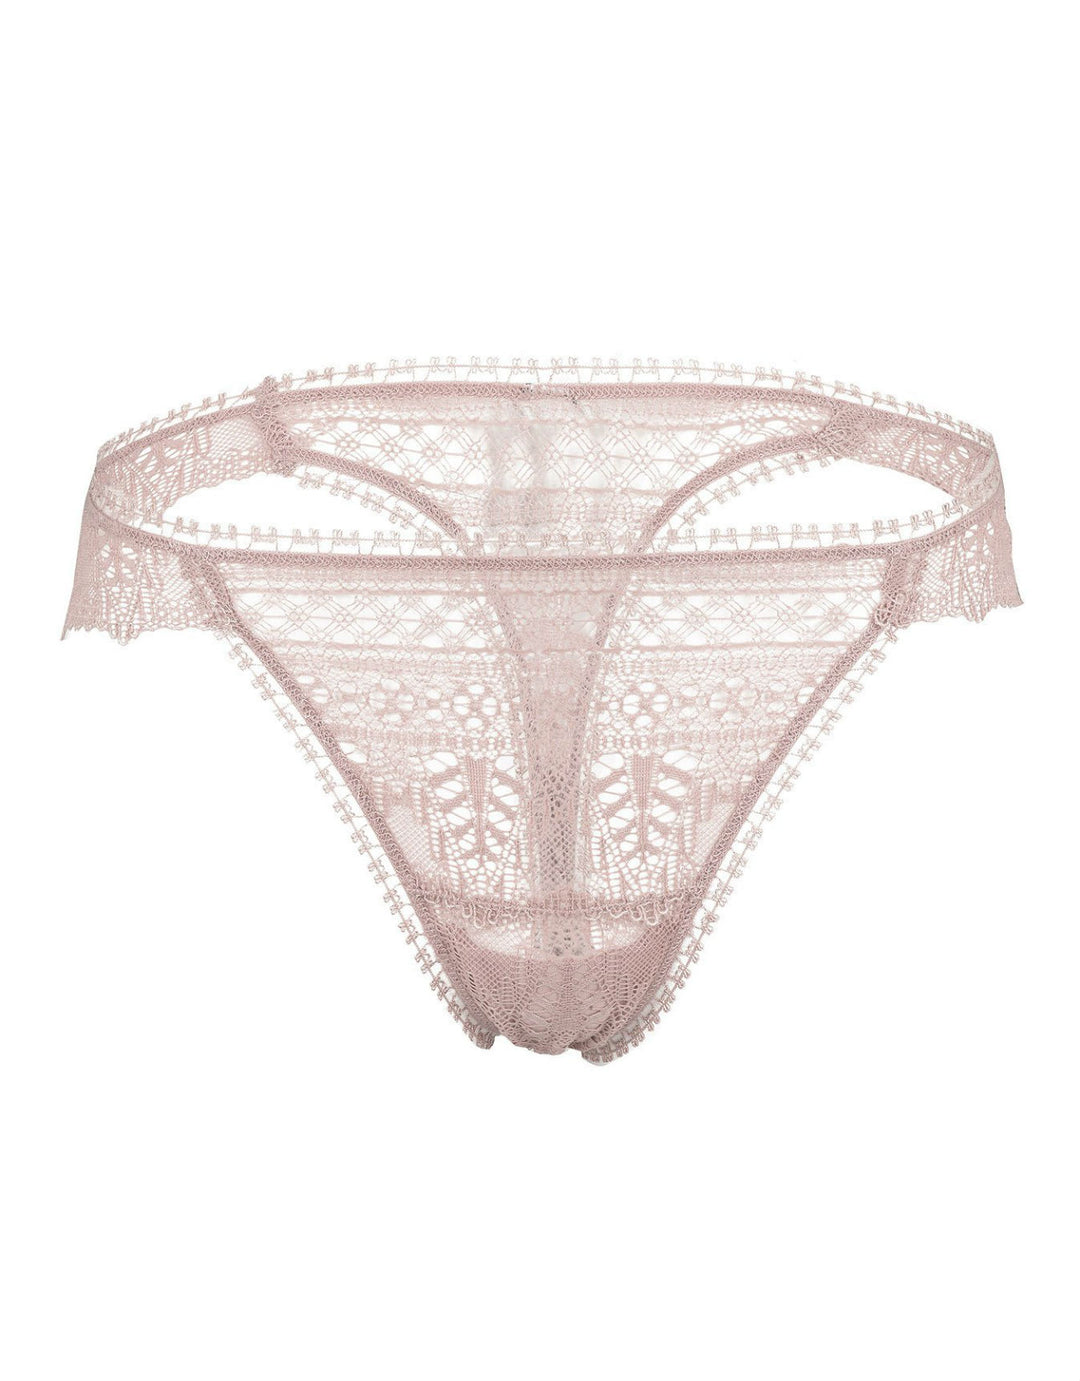 Else Ivy Lace Thong in Ballet Pink